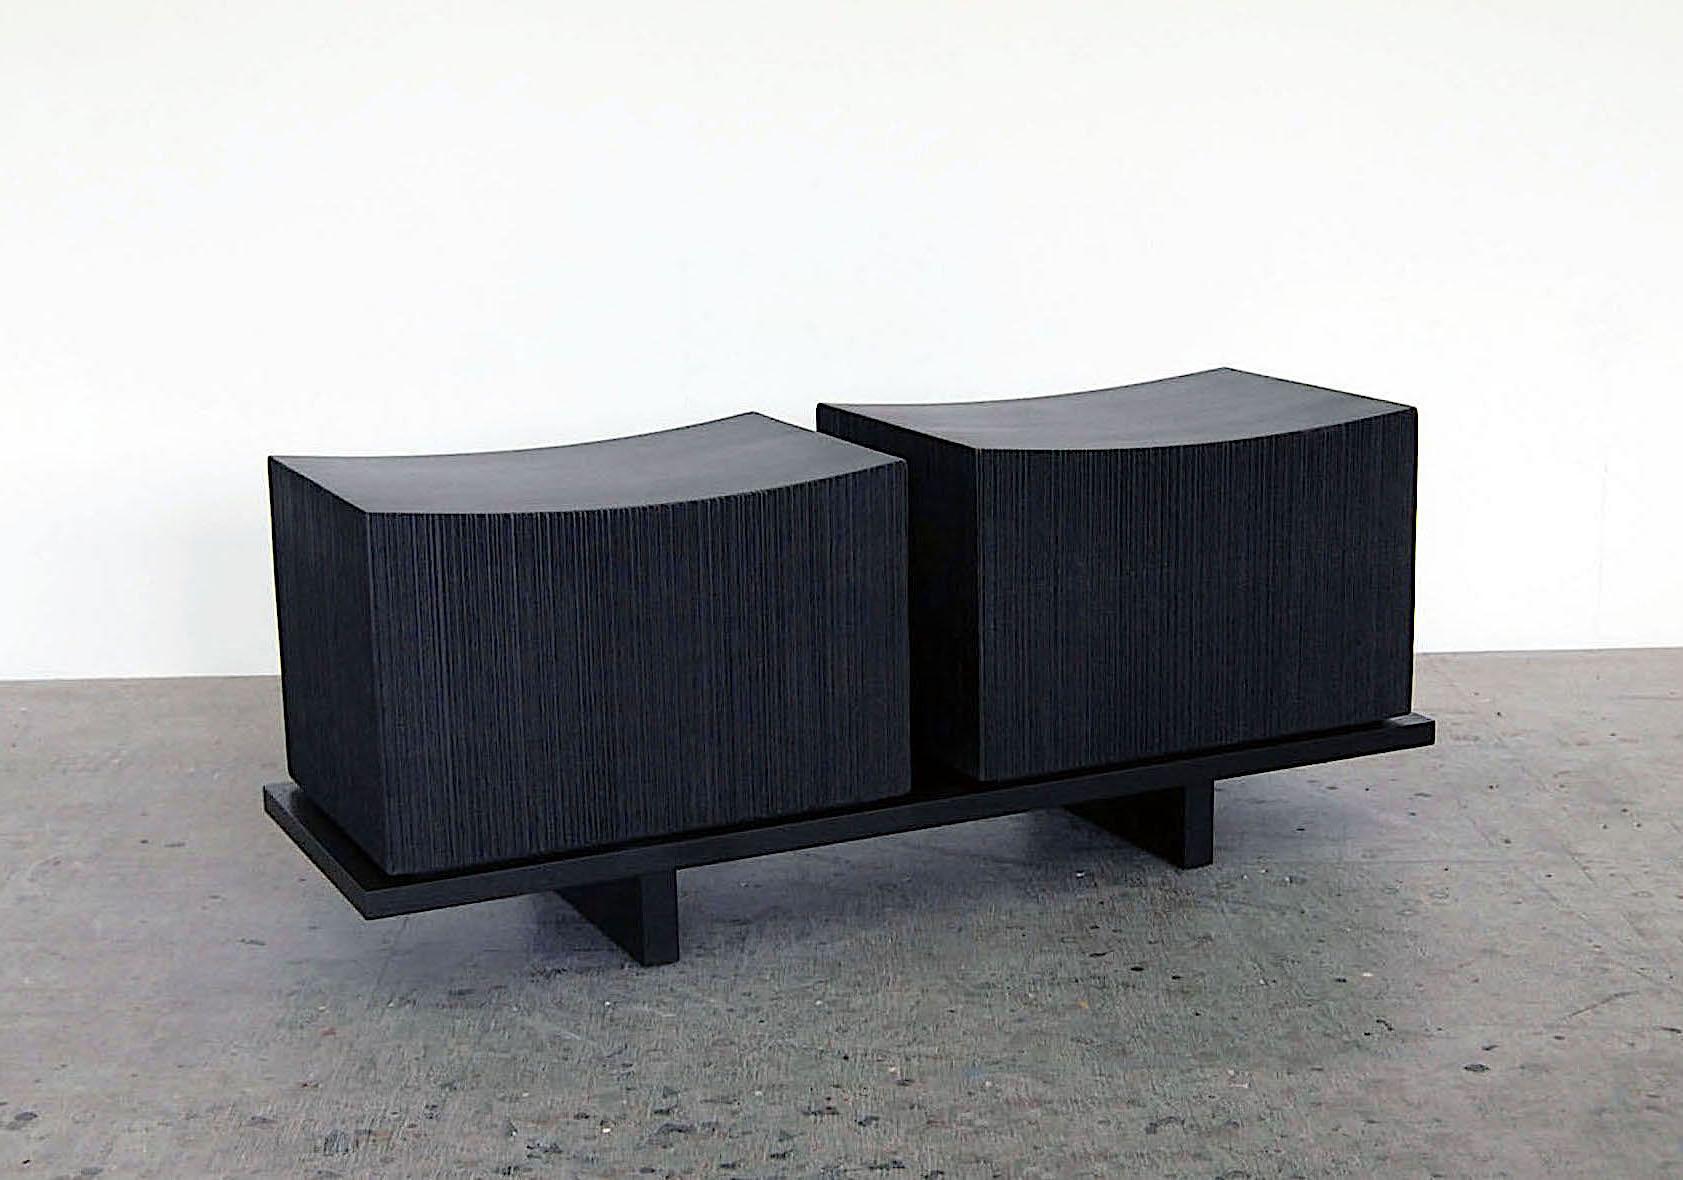 Maple loft bench for two by John Eric Byers
Dimensions: 45.7 x 114.3 x 36.8 cm
Materials: Carved blackened maple

All works are individually handmade to order.

John Eric Byers creates geometrically inspired pieces that are minimal, emotional,